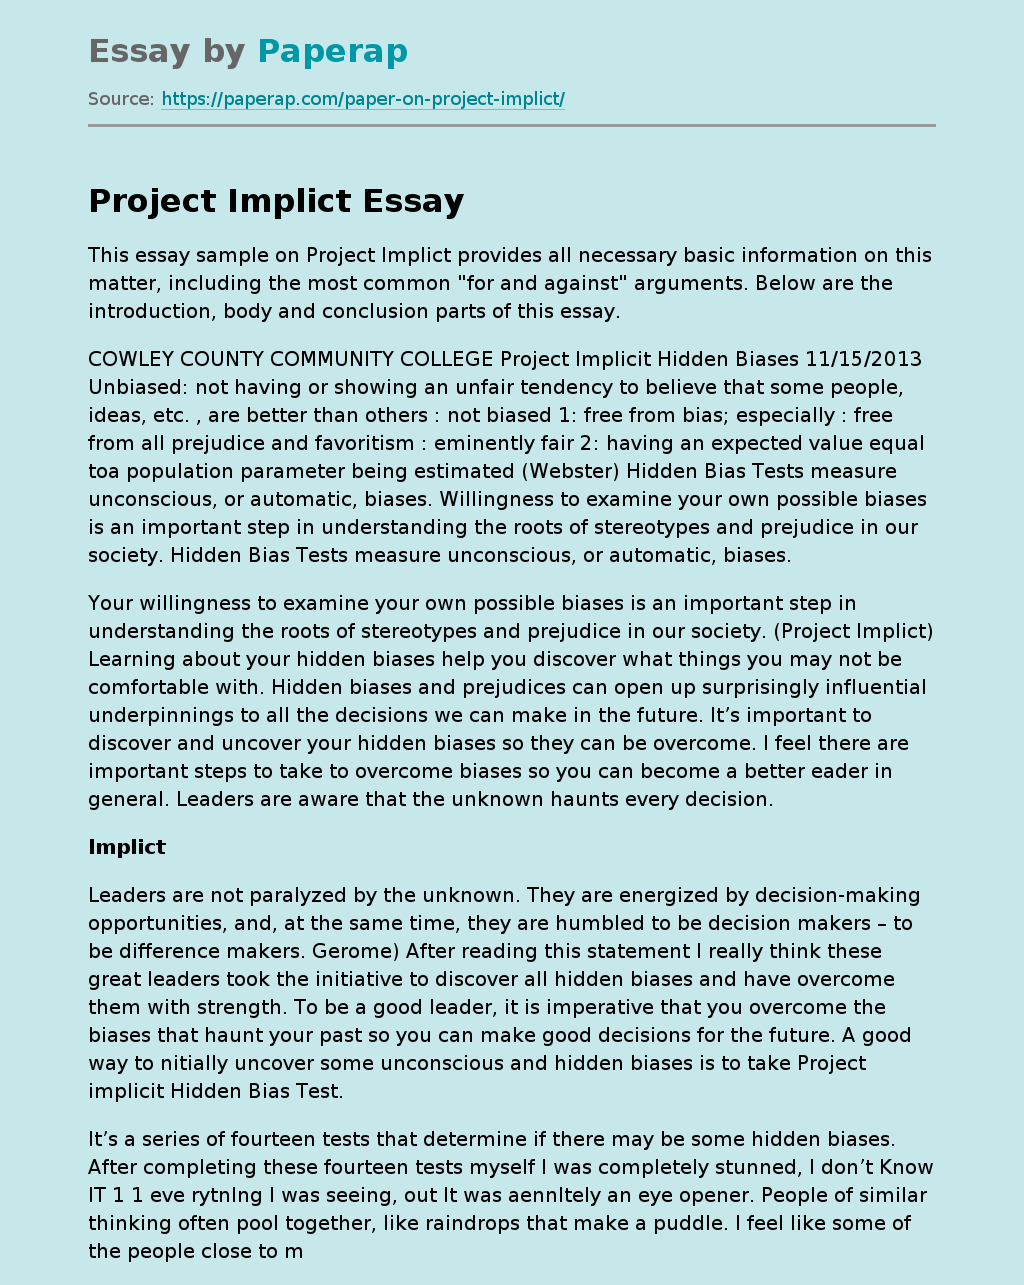 Project Implict